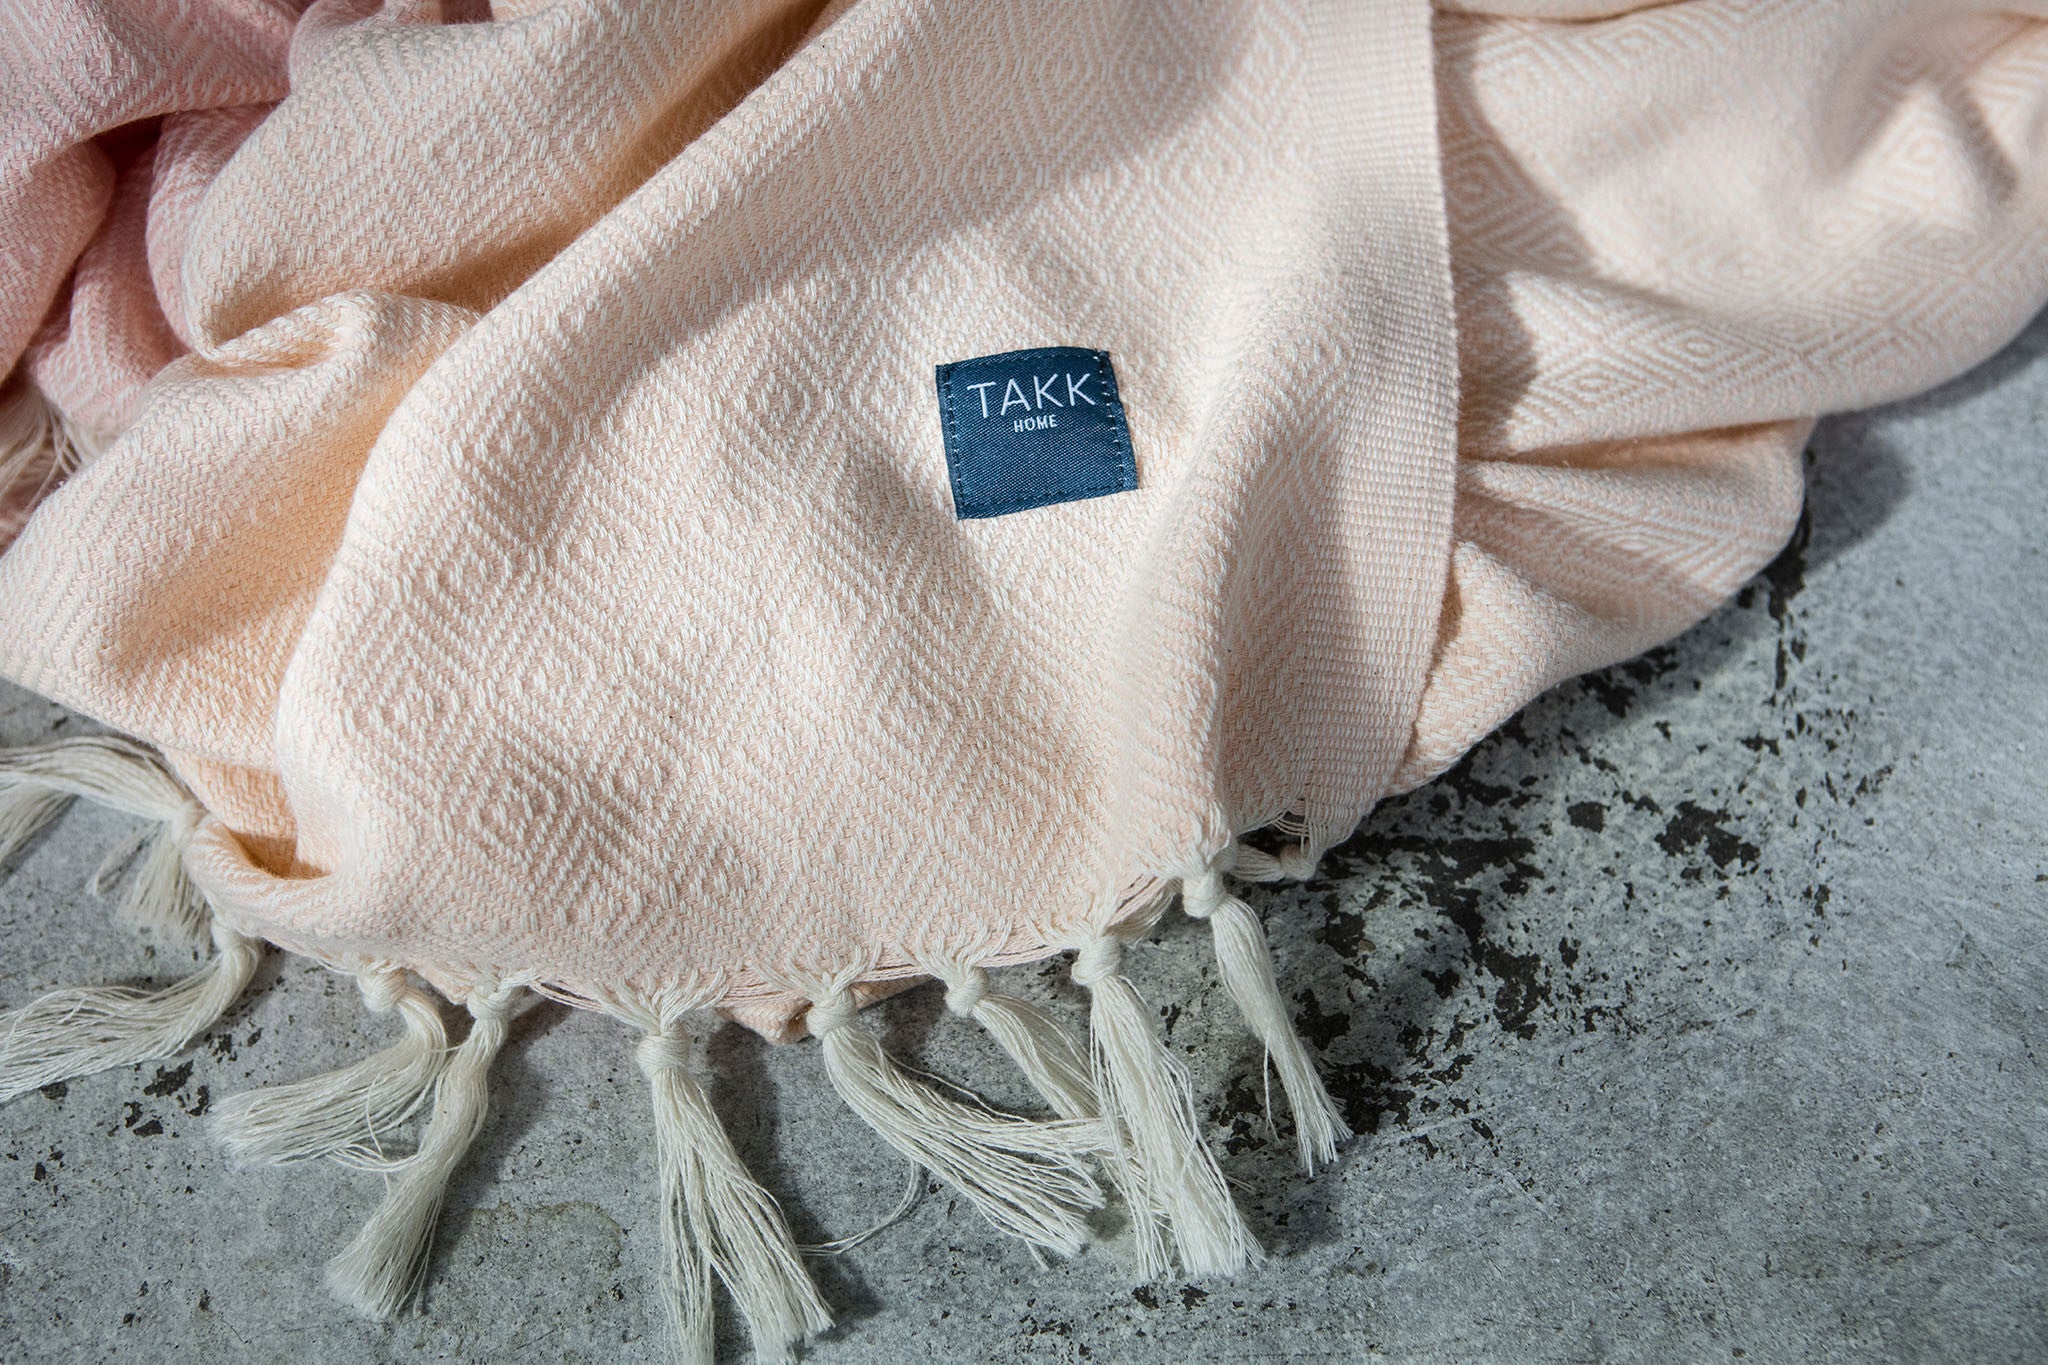 Luxurious hamam bath towel. Soft, absorbent, light weight, quick drying, aesthetically pleasing. Takes up little space. Ideal for bath, beach, travel, sports, yoga. Can also be used as a blanket or a scarf. Popular as a baby blanket. OEKO-TEX®, eco-friendly certification. 100% quality cotton. Pink hammam towel